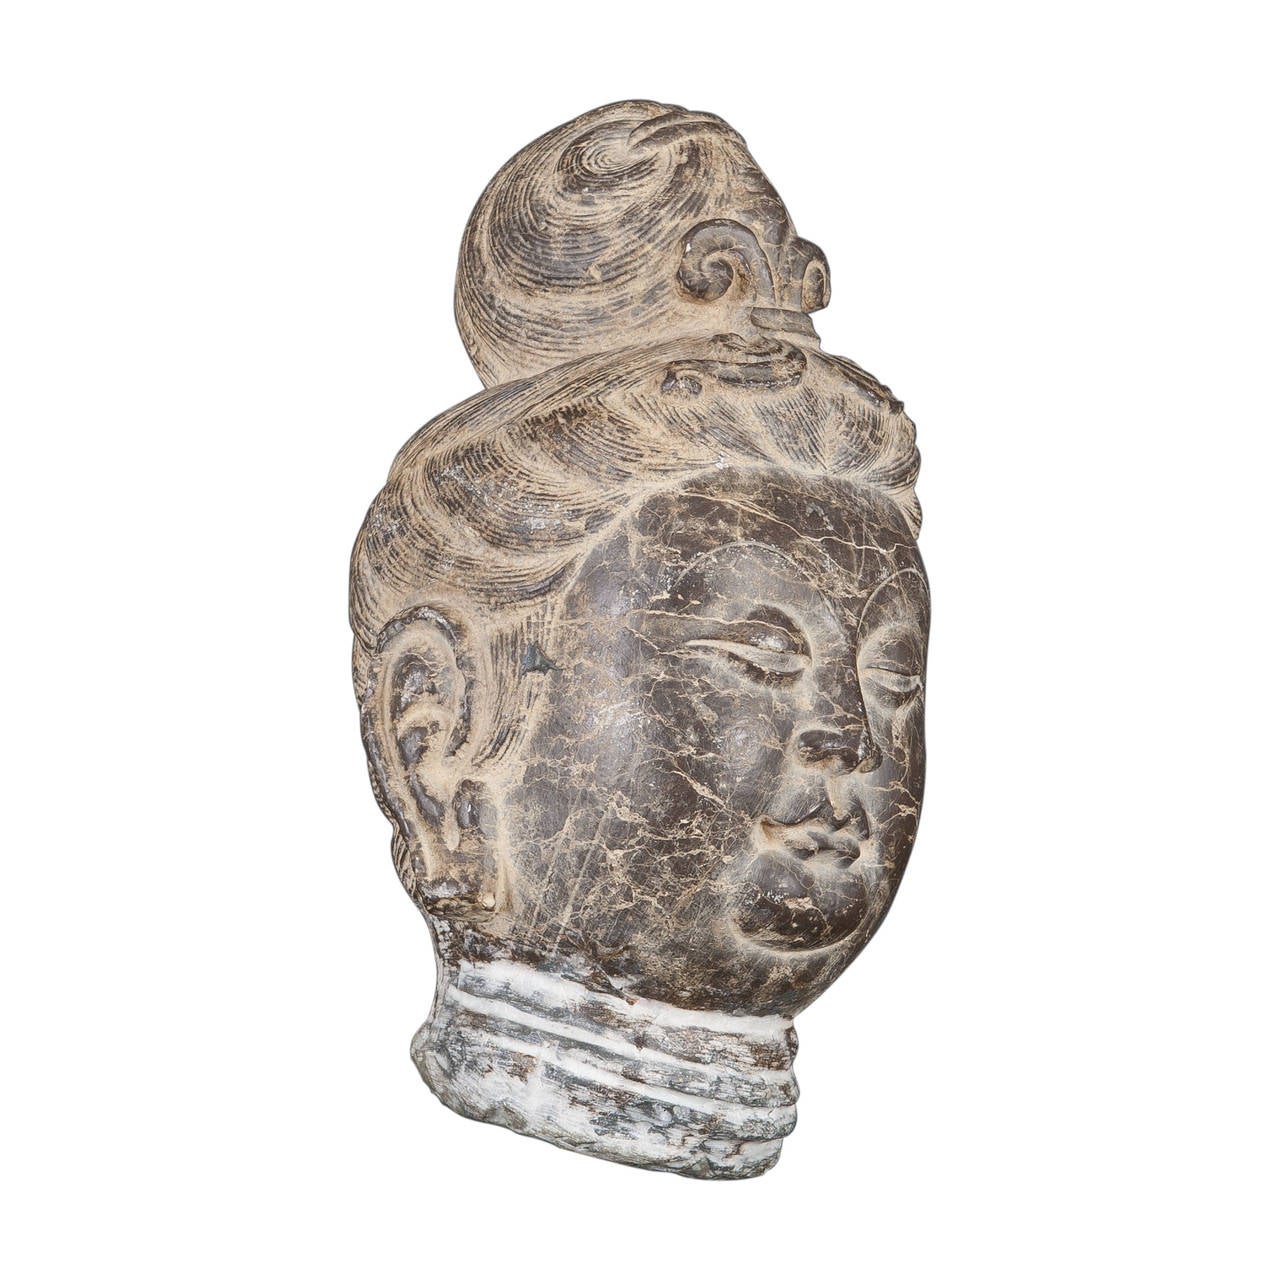 Beautiful Buddha head in te style of tang dynasty
In this period art sculptures had a new aesthetic vision similar to Indian style, and this sculpture has typical traits of Buddhist iconography of the period. Like the round face whose soft lines